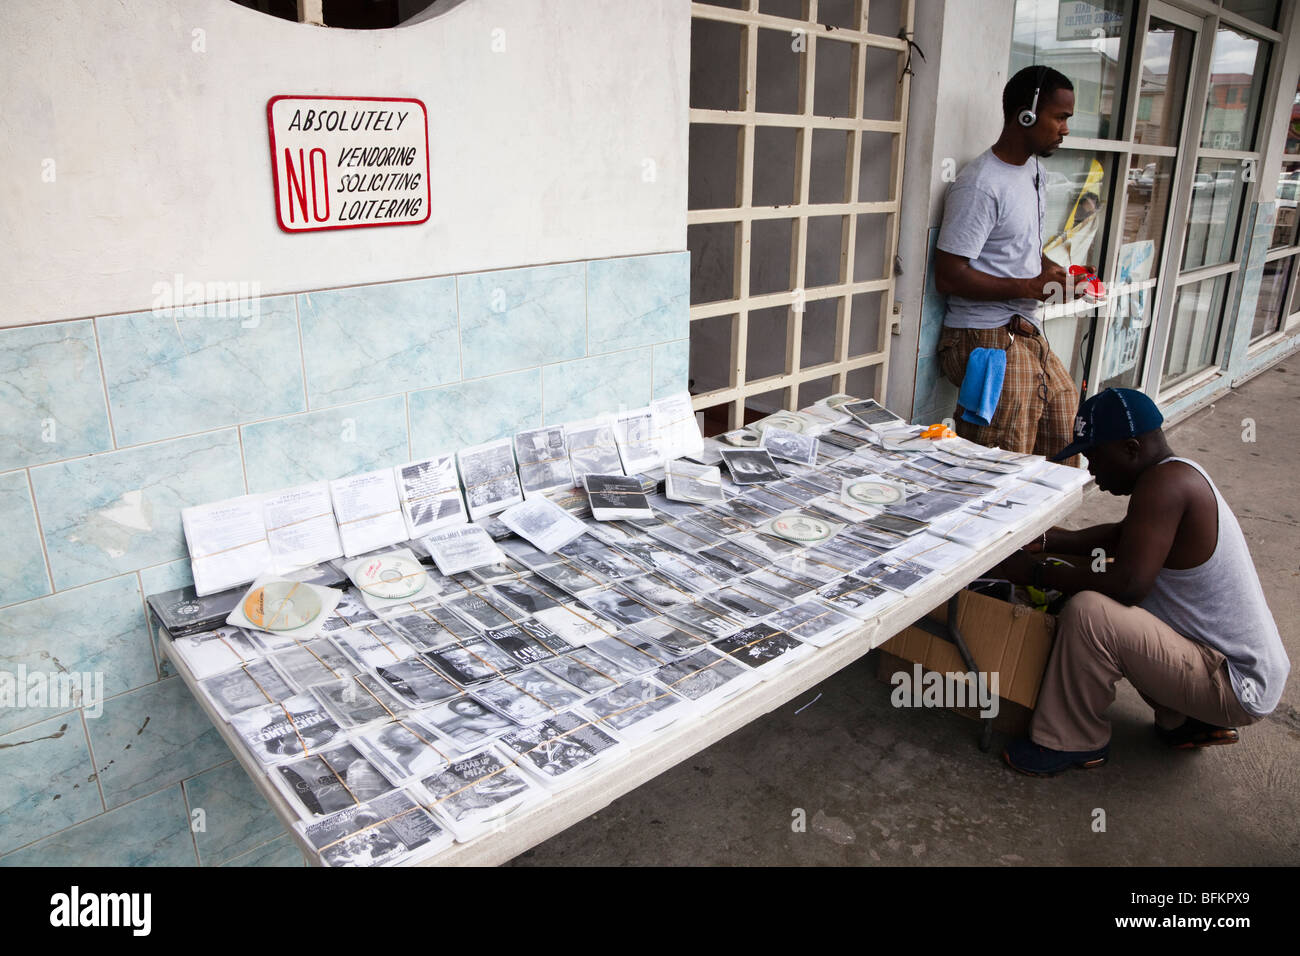 Illegal vendor selling bootleg CDs and Videos from a stall in St Johns town, Antigua, West Indies Stock Photo